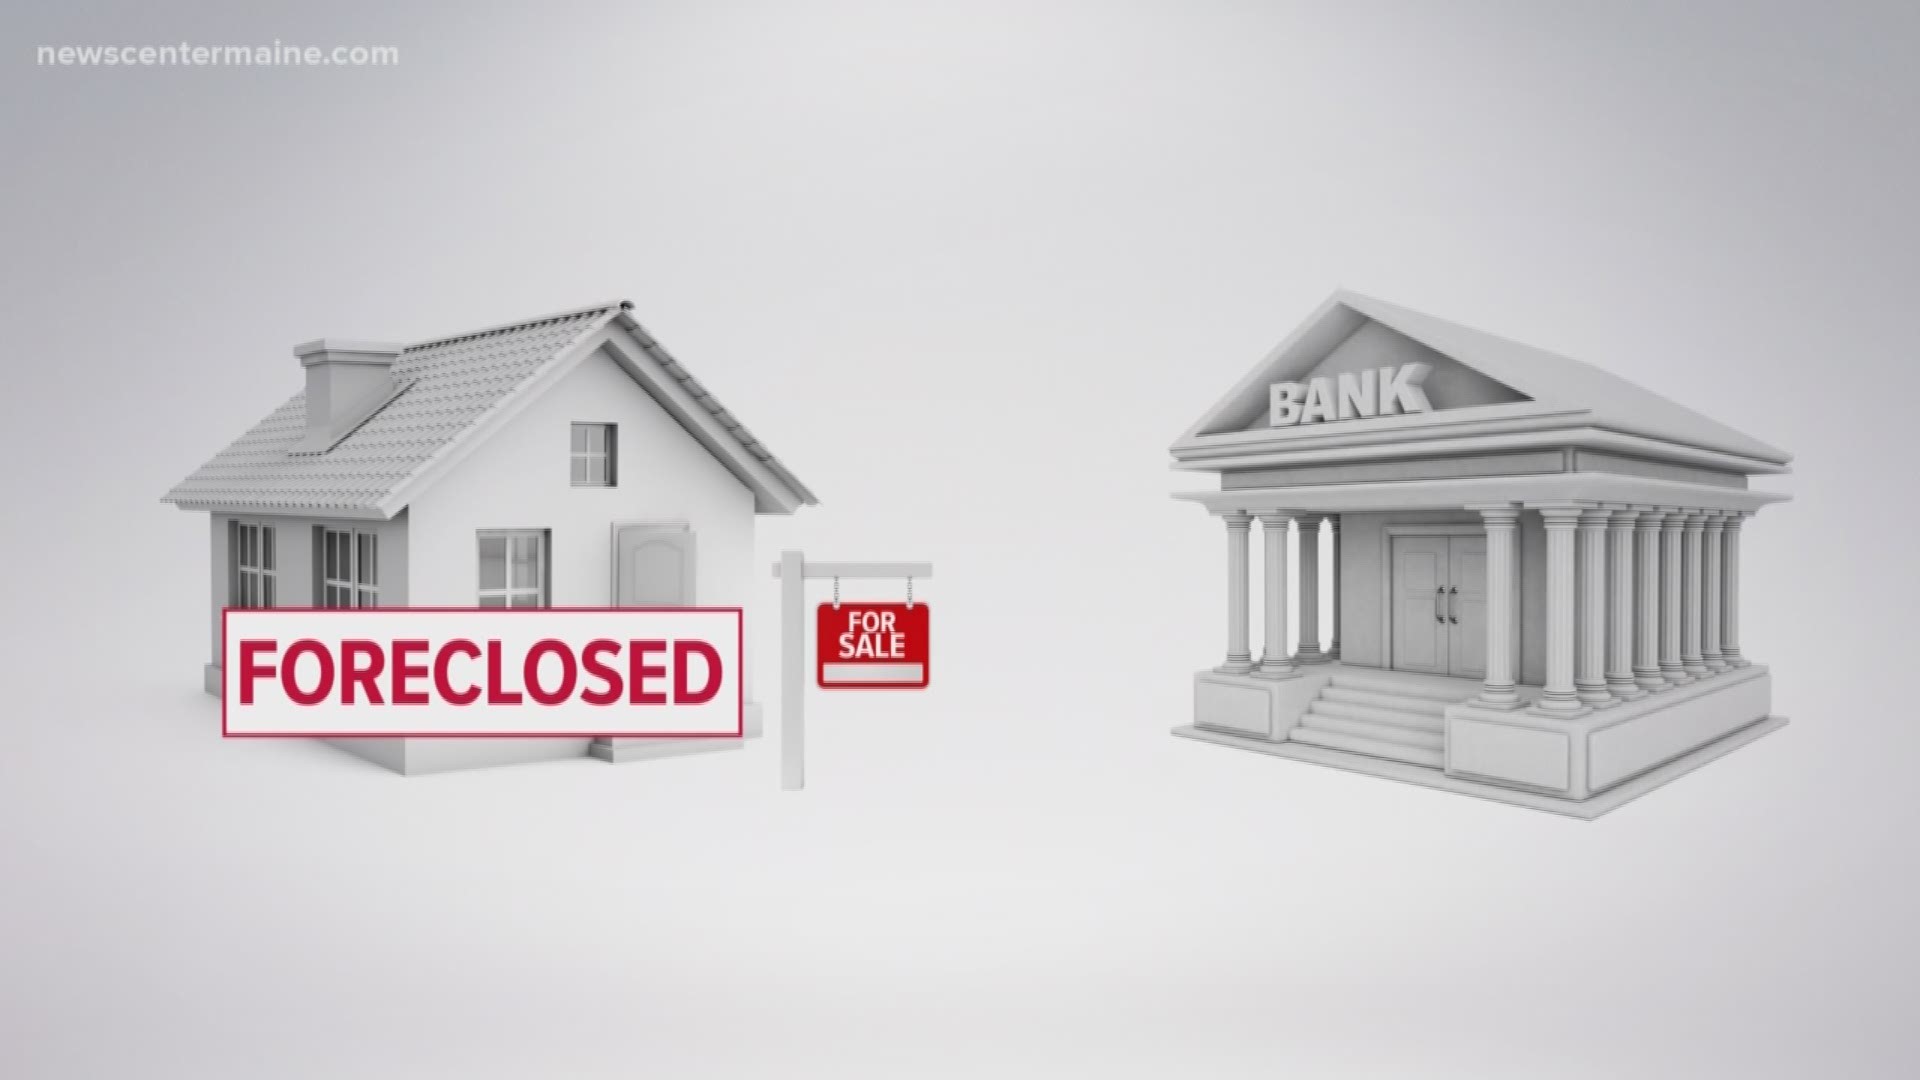 #askNOW: Keeping a mortgage a good idea?